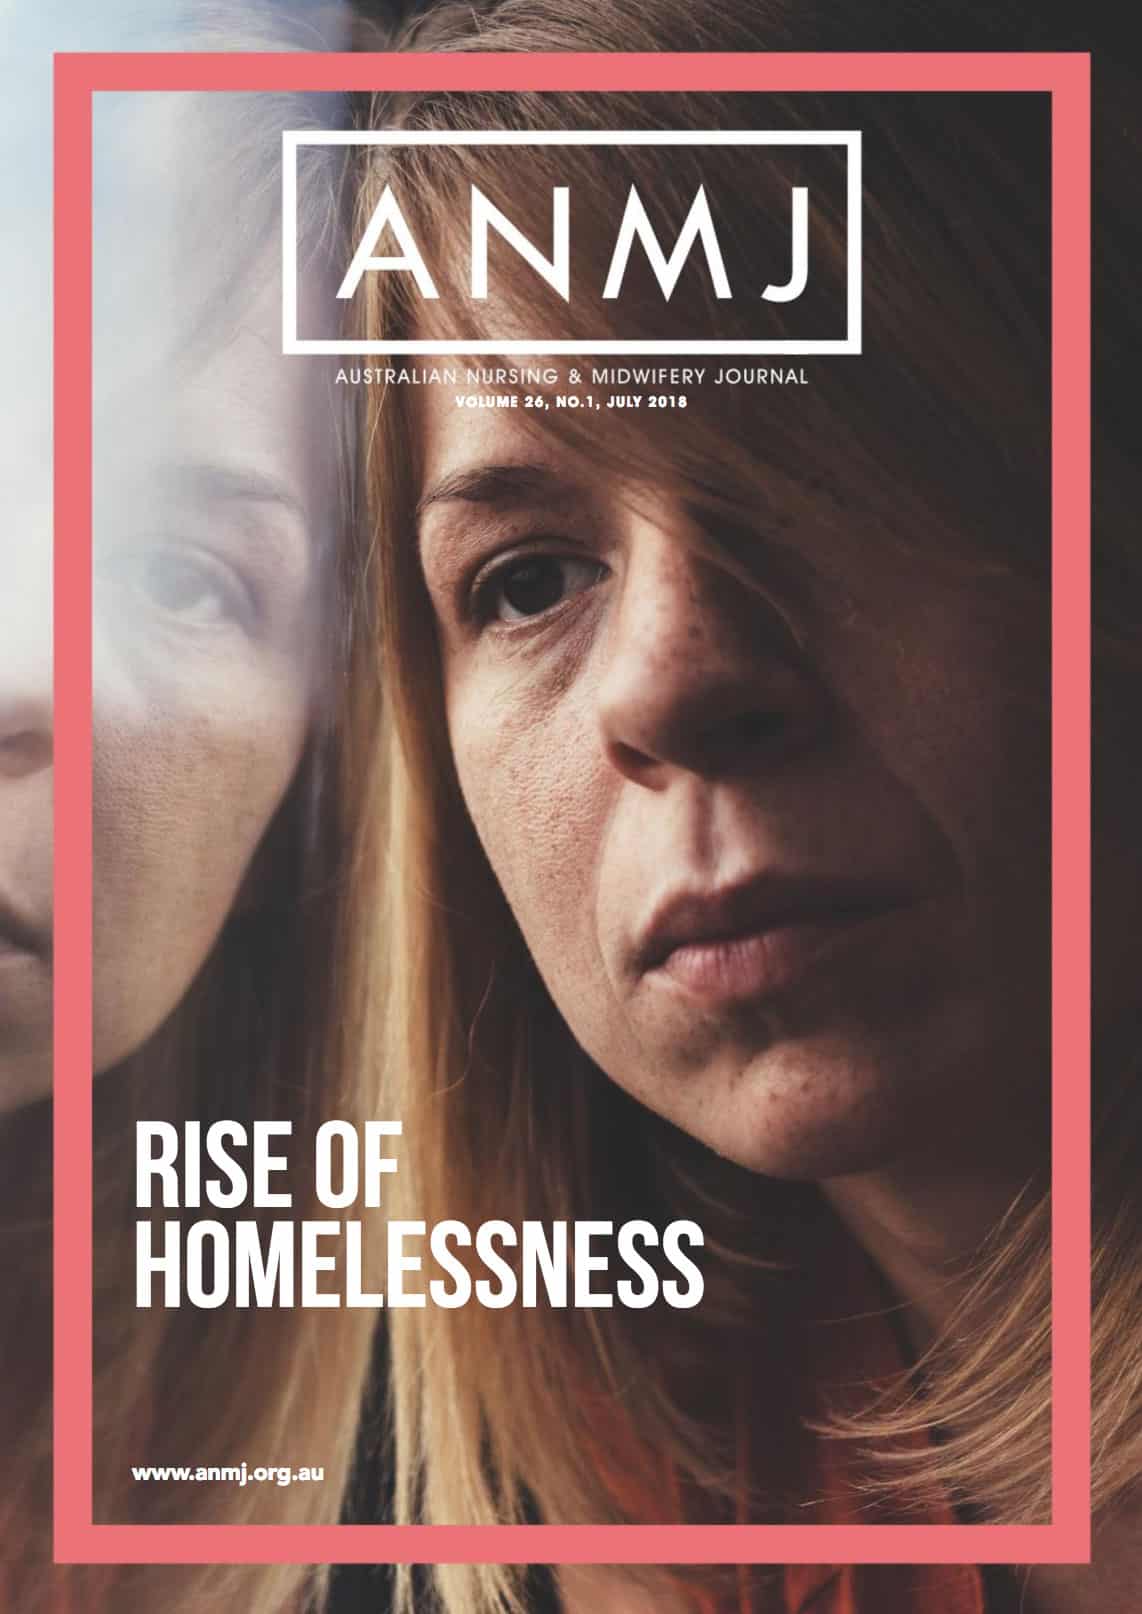 ANMJ July 2018 Issue